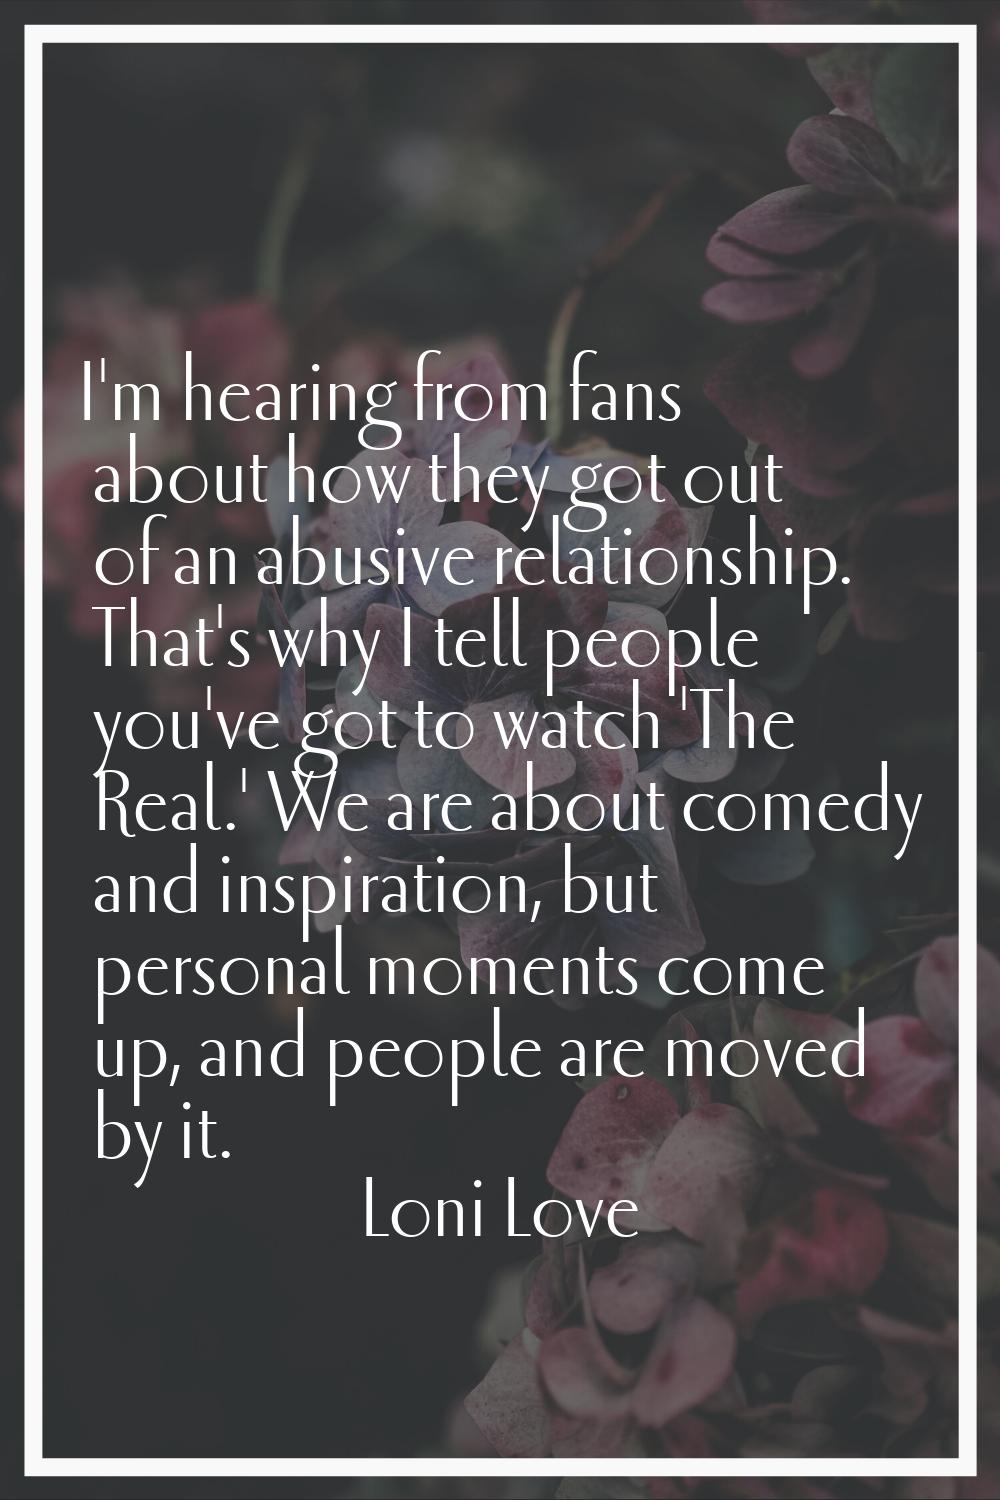 I'm hearing from fans about how they got out of an abusive relationship. That's why I tell people y